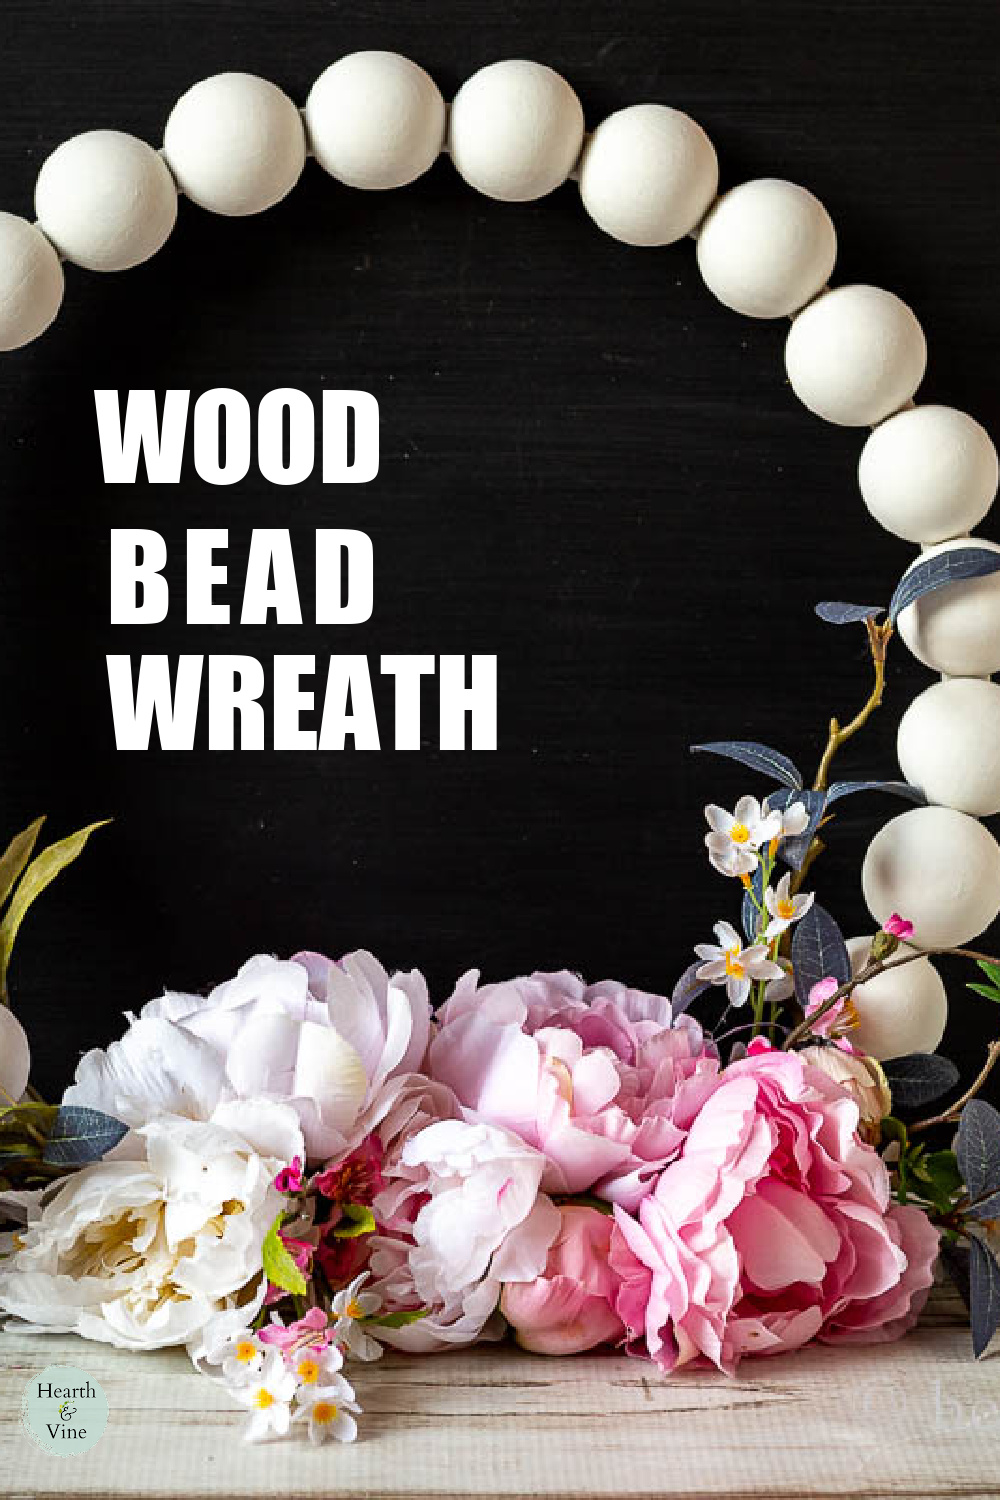 Partial view of a white wooden bead wreath with artificial peonies, blossoms and leaves.